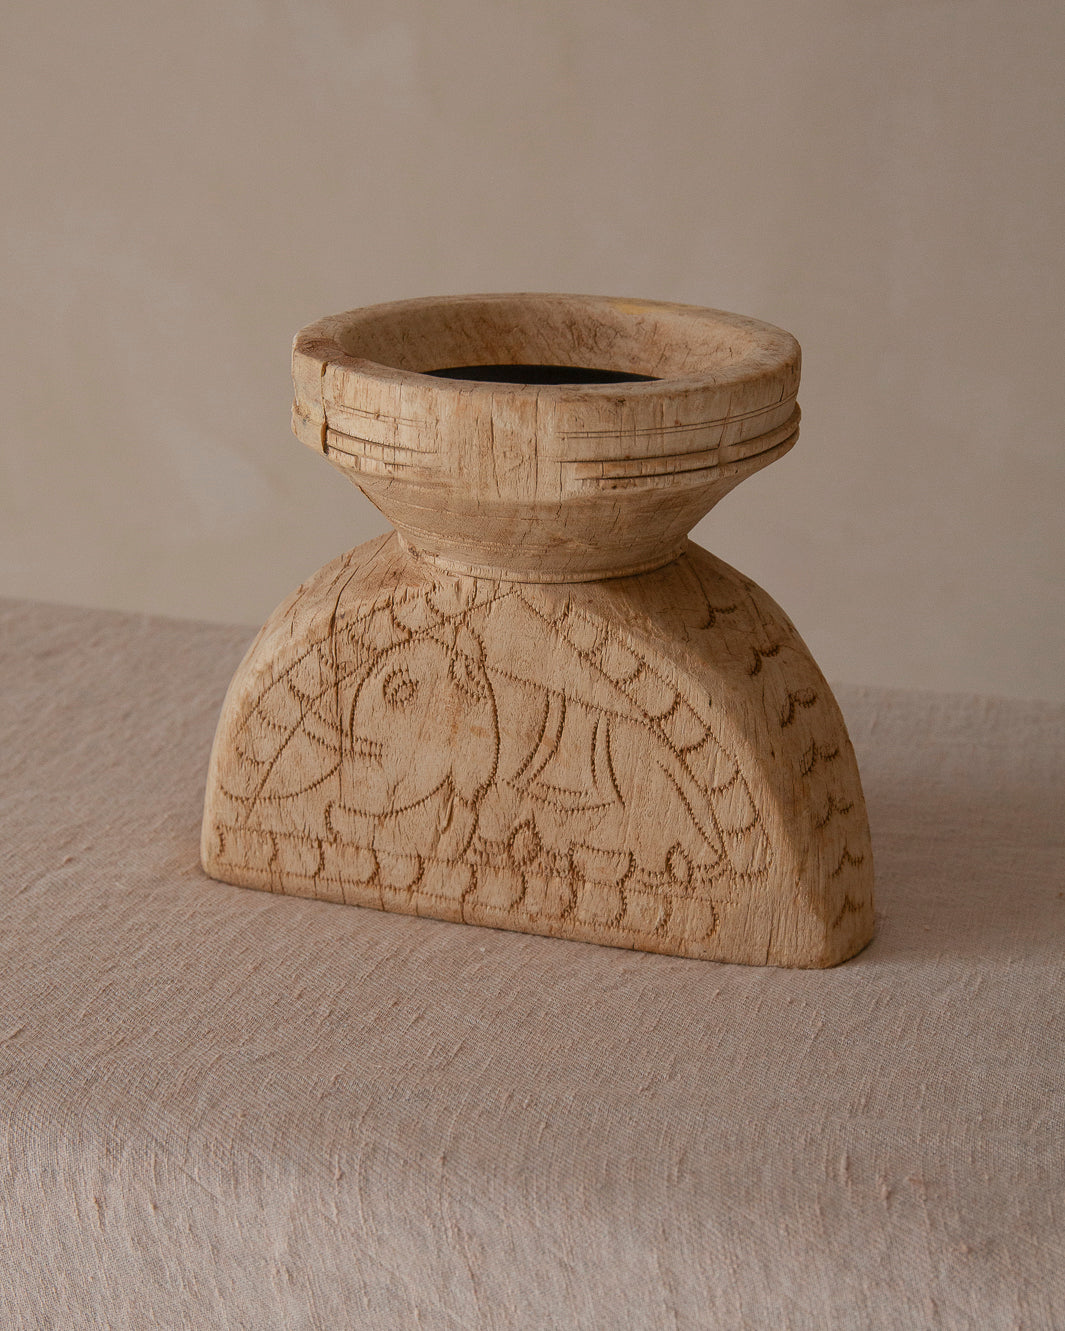 Torchon candle holder